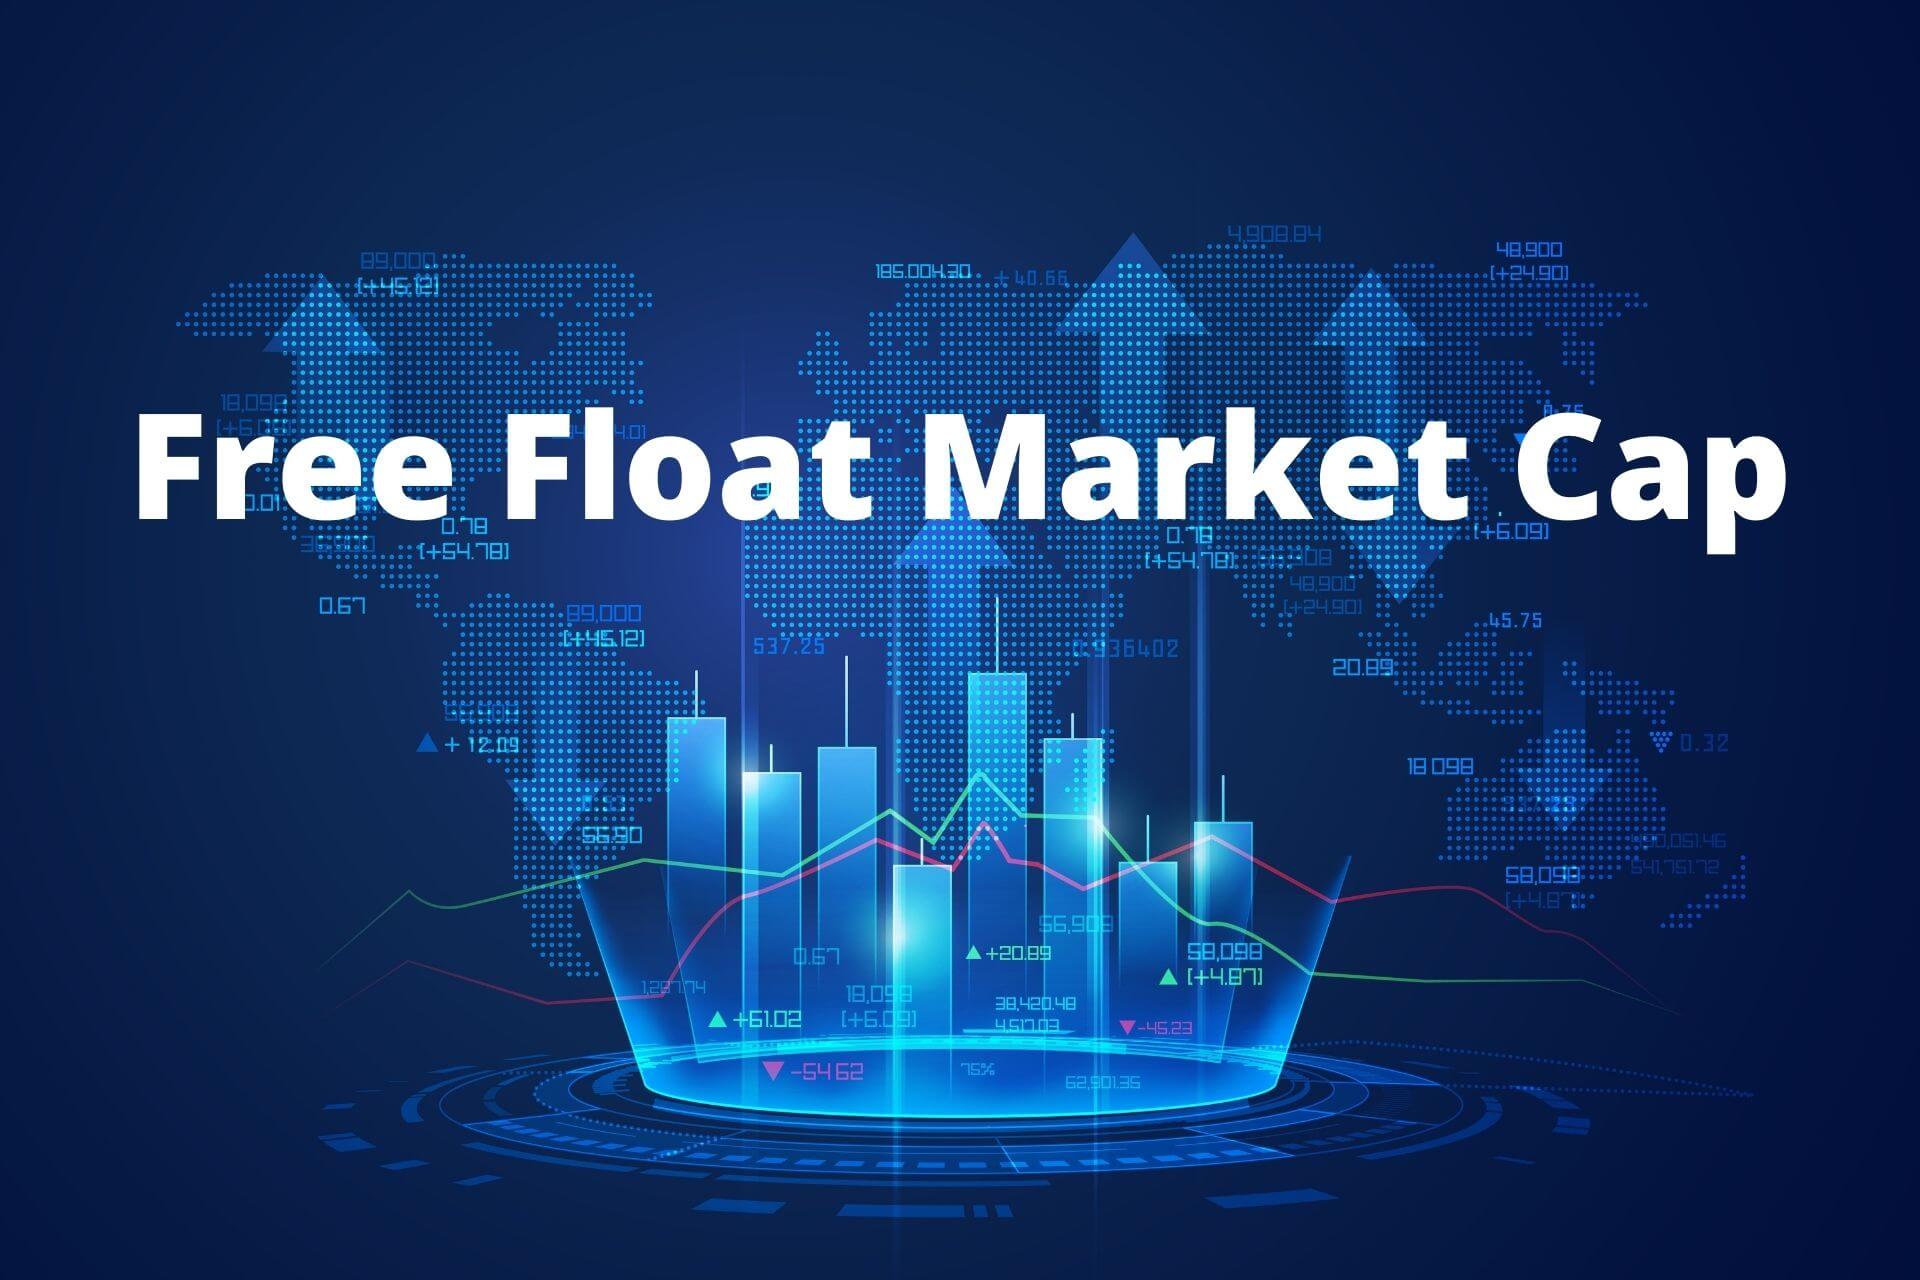 Kavan Choksi Japan: What Do You Mean By Market Capitalization and Free Float Methodology in The Stock Market?